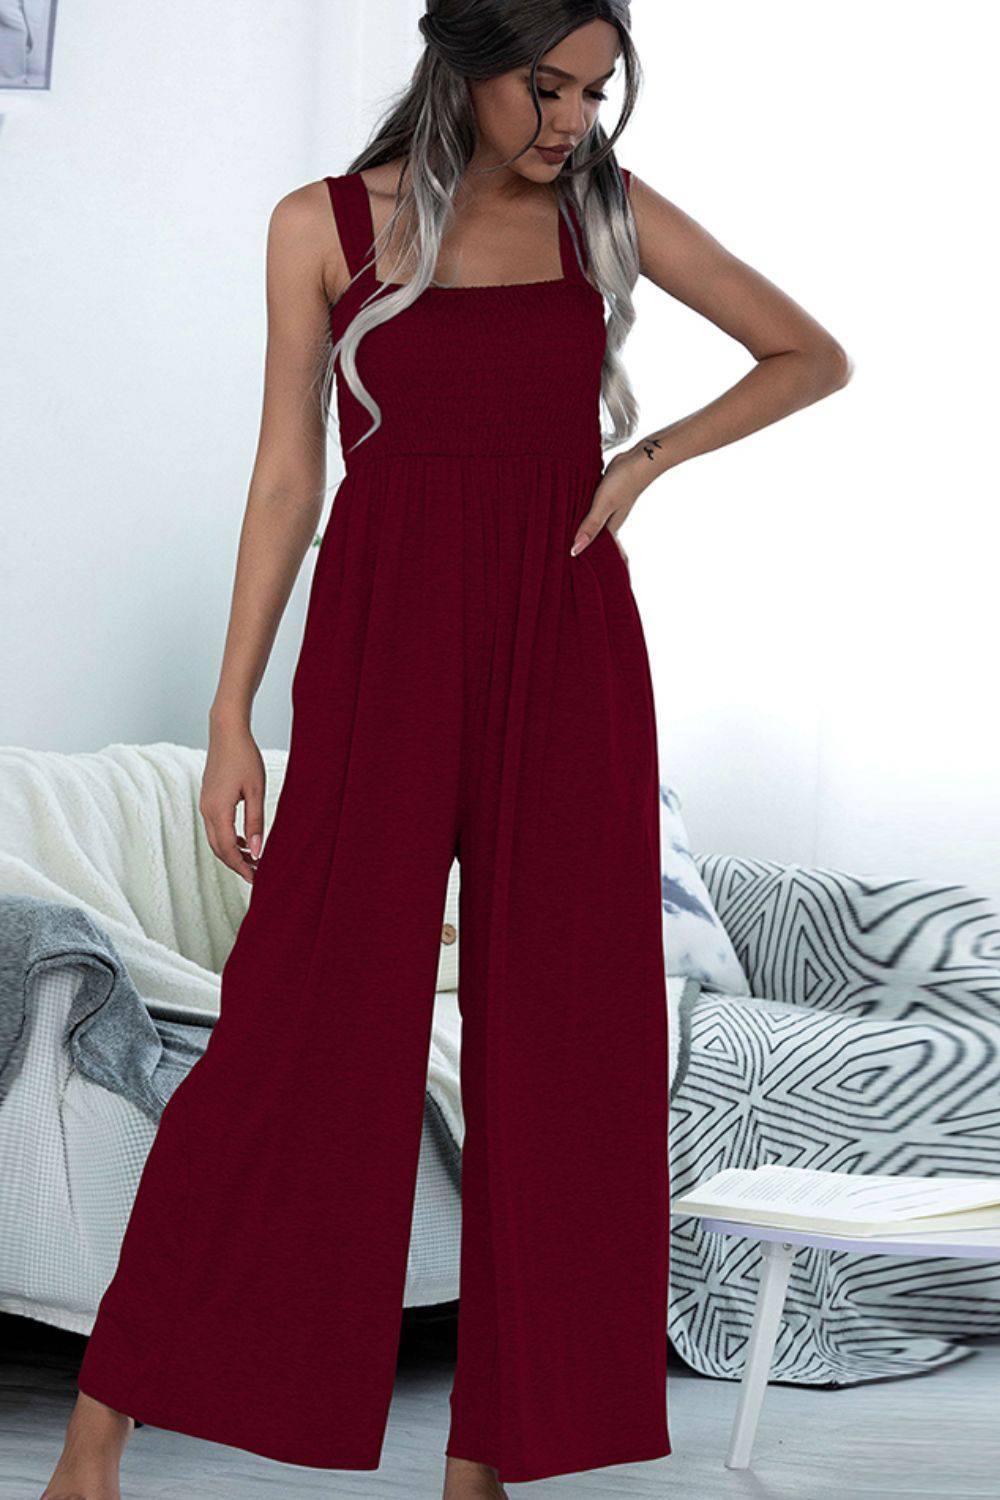 Enchantress Jumpsuit - Embrace Your Inner Magic and Captivate Hearts with this Dreamy Outfit - Look Alluring and Feel Effortlessly Confident. - Guy Christopher